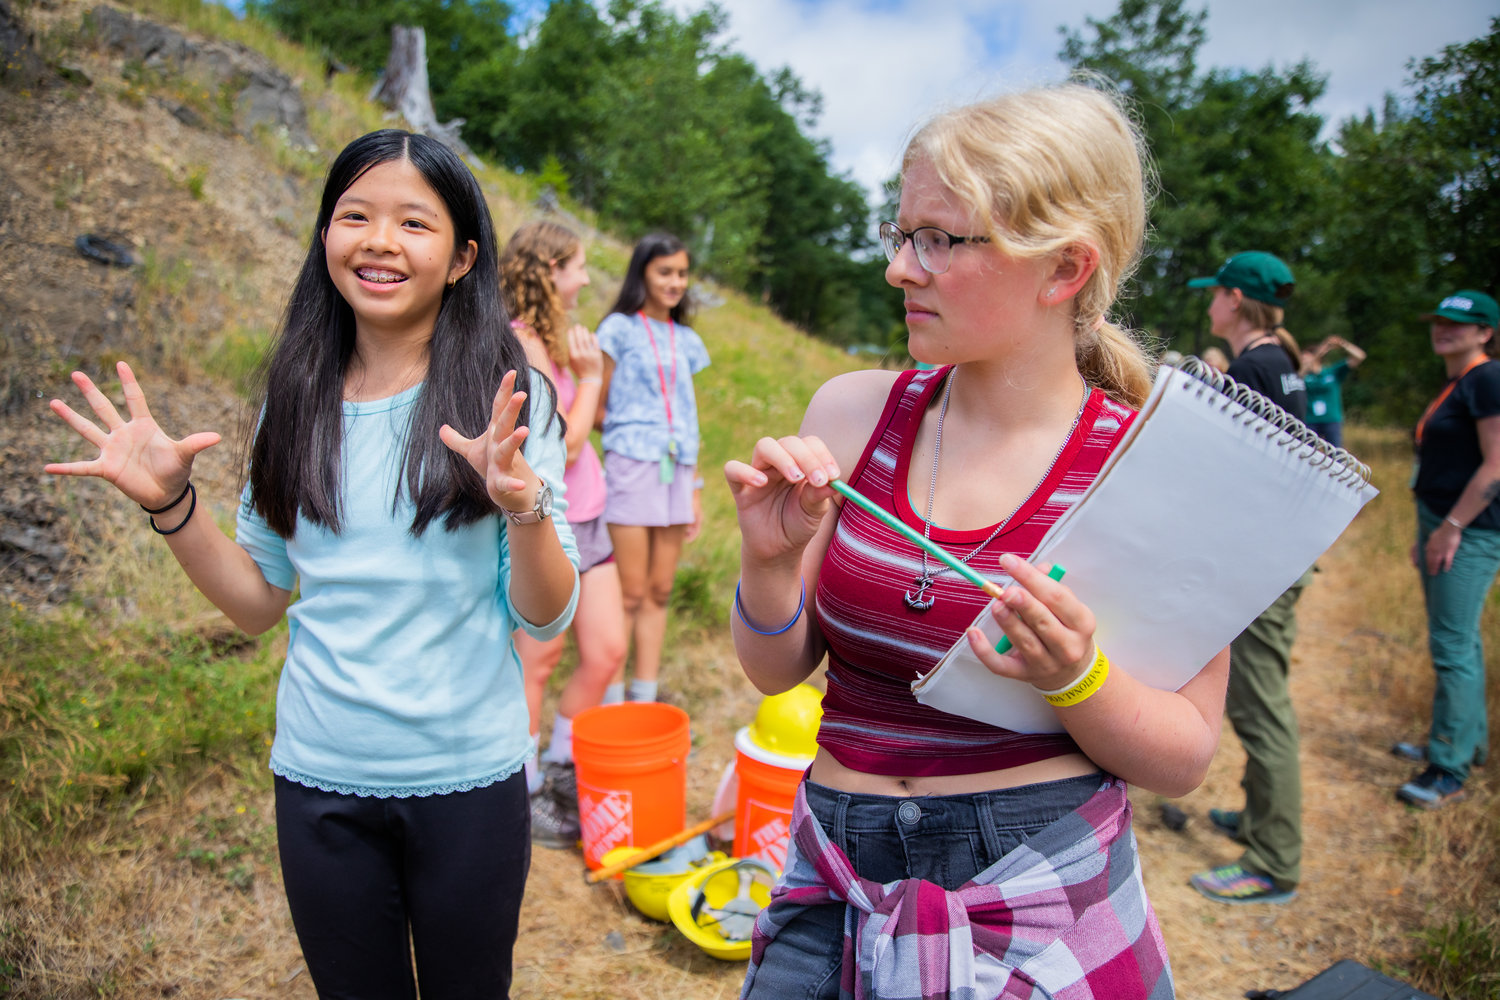 Rainy Wu, 13, of Camas, smiles and talks about connections made during GeoGirls camp at the Mount St. Helens Science and Learning Center at Coldwater alongside Miranda Huibelt.